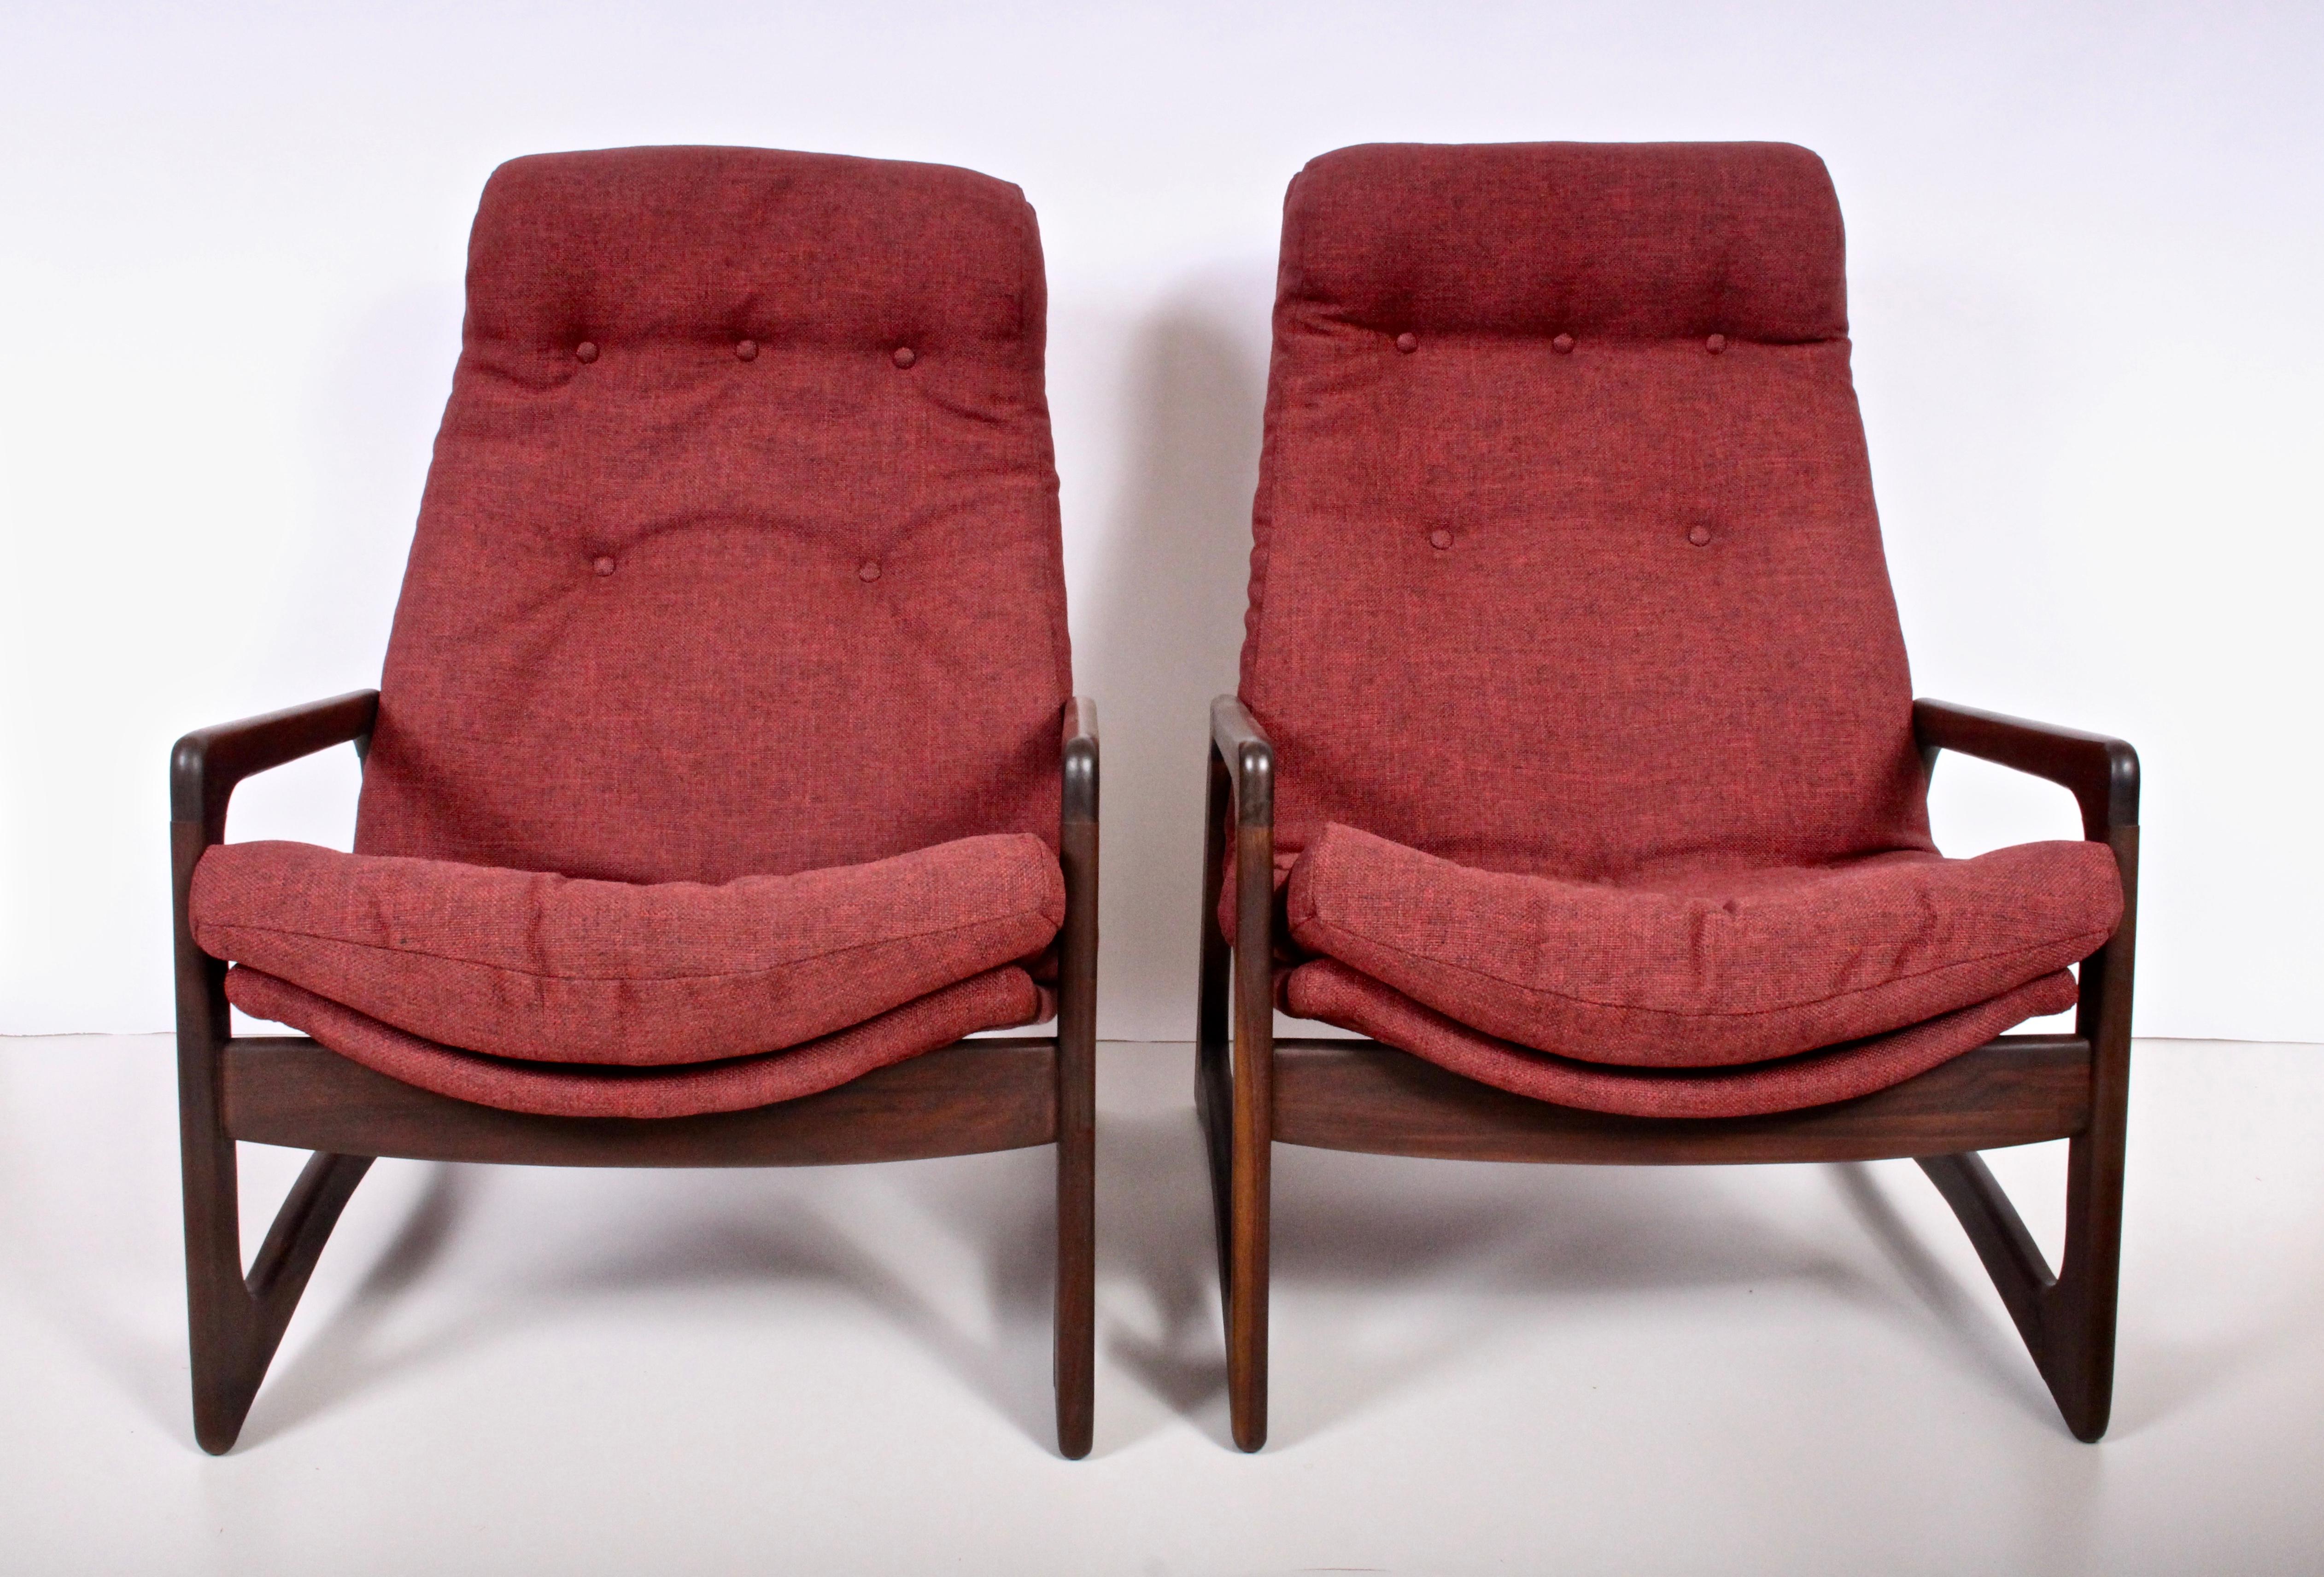 Pair of Adrian Pearsall for Craft Associates Inc. walnut lounge armchairs, 1960's. Featuring an ergonomic design in solid Walnut with new woven Burgundy and Black woolen upholstery. 17H to front of seat. Classic. Casual. Comfort. Made in the USA. 